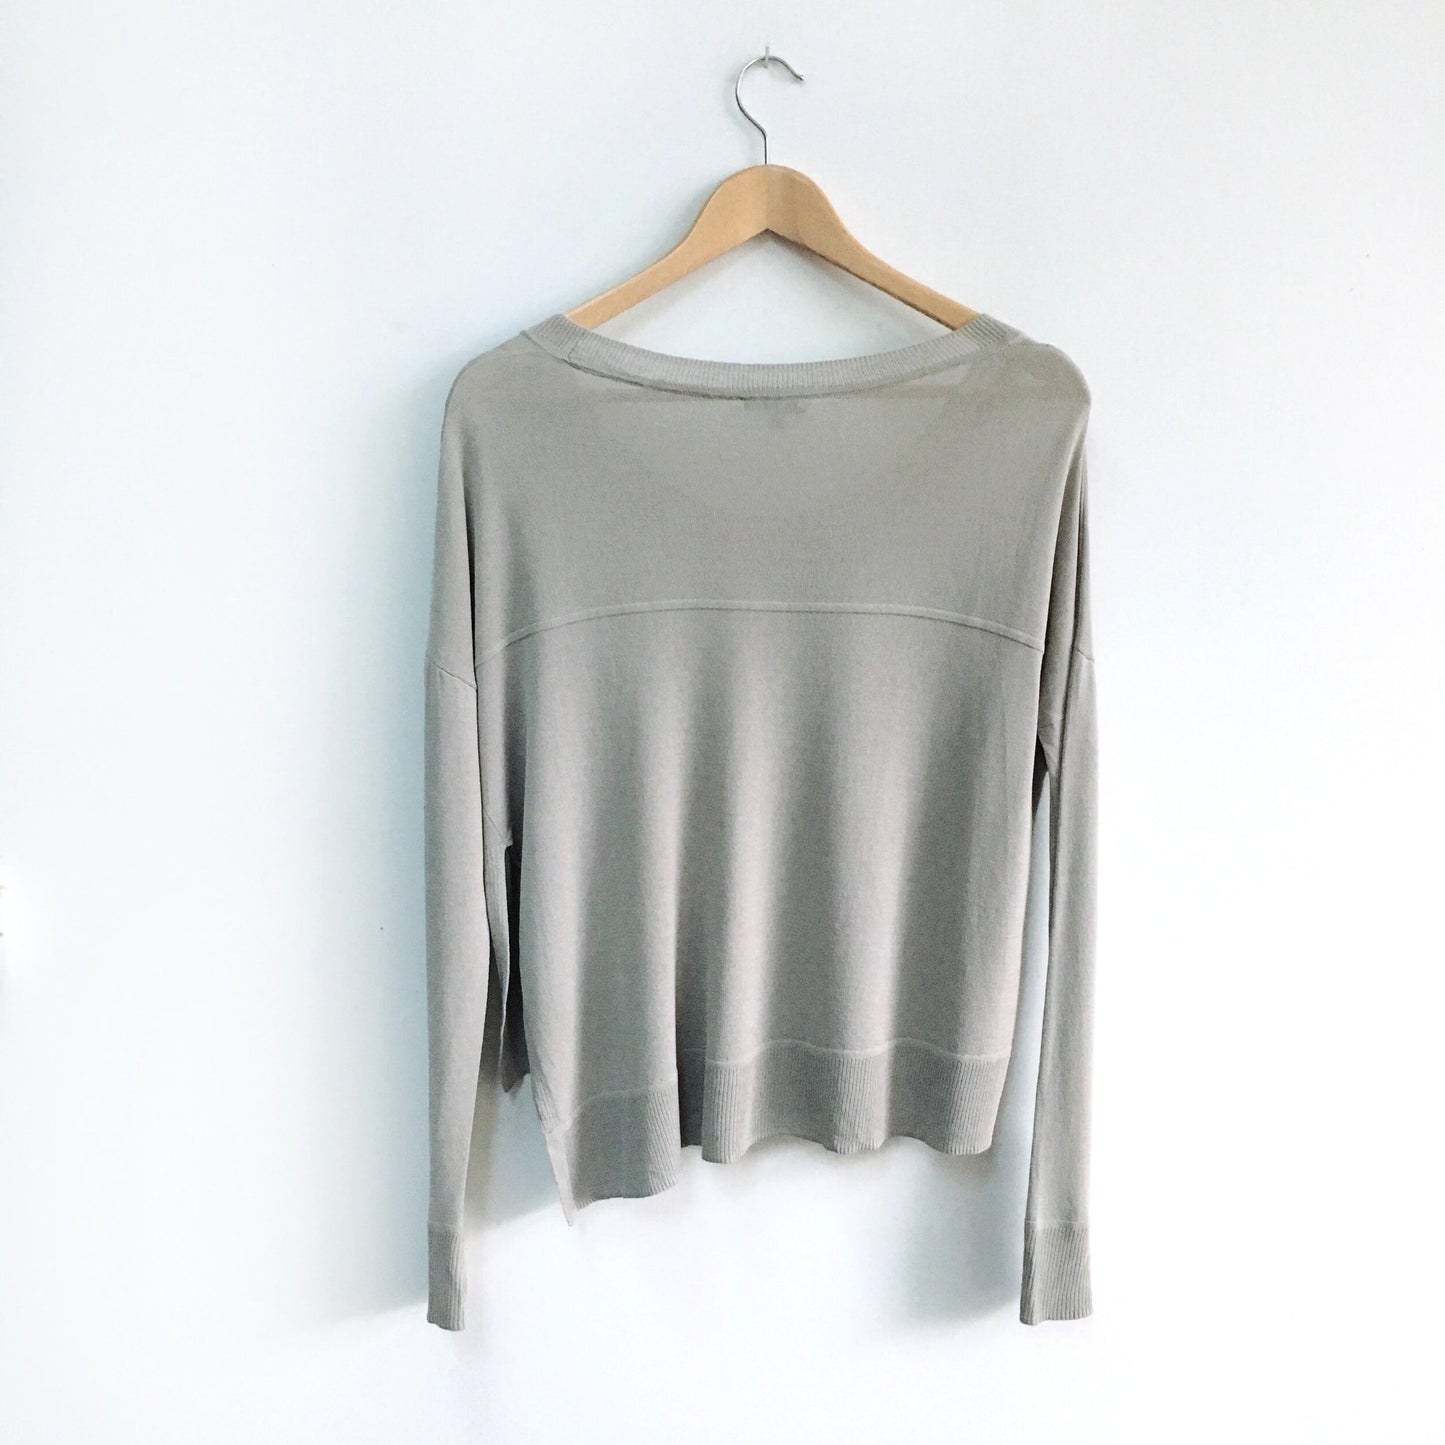 Wilfred Librement Sweater - size xs